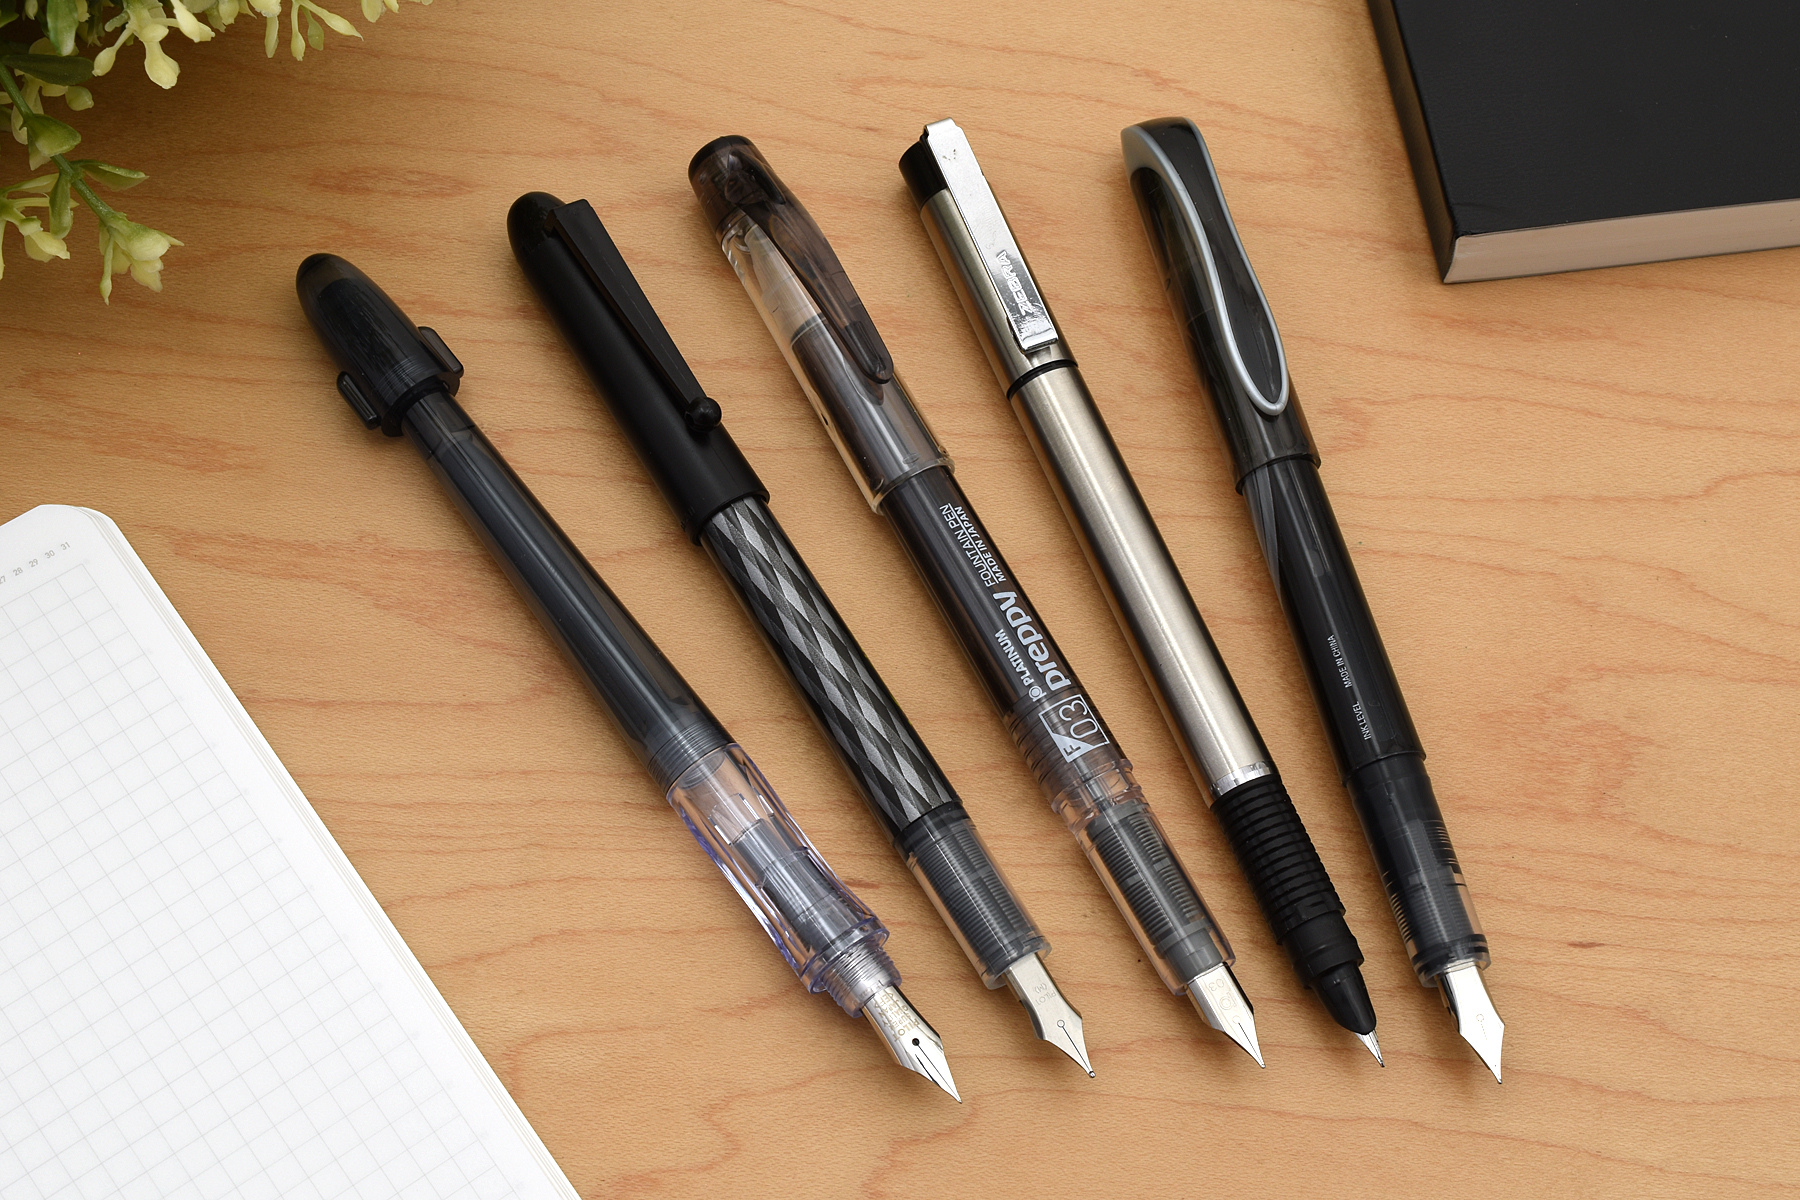 Consider a beginner fountain pen to learn about its different parts and how each component works.